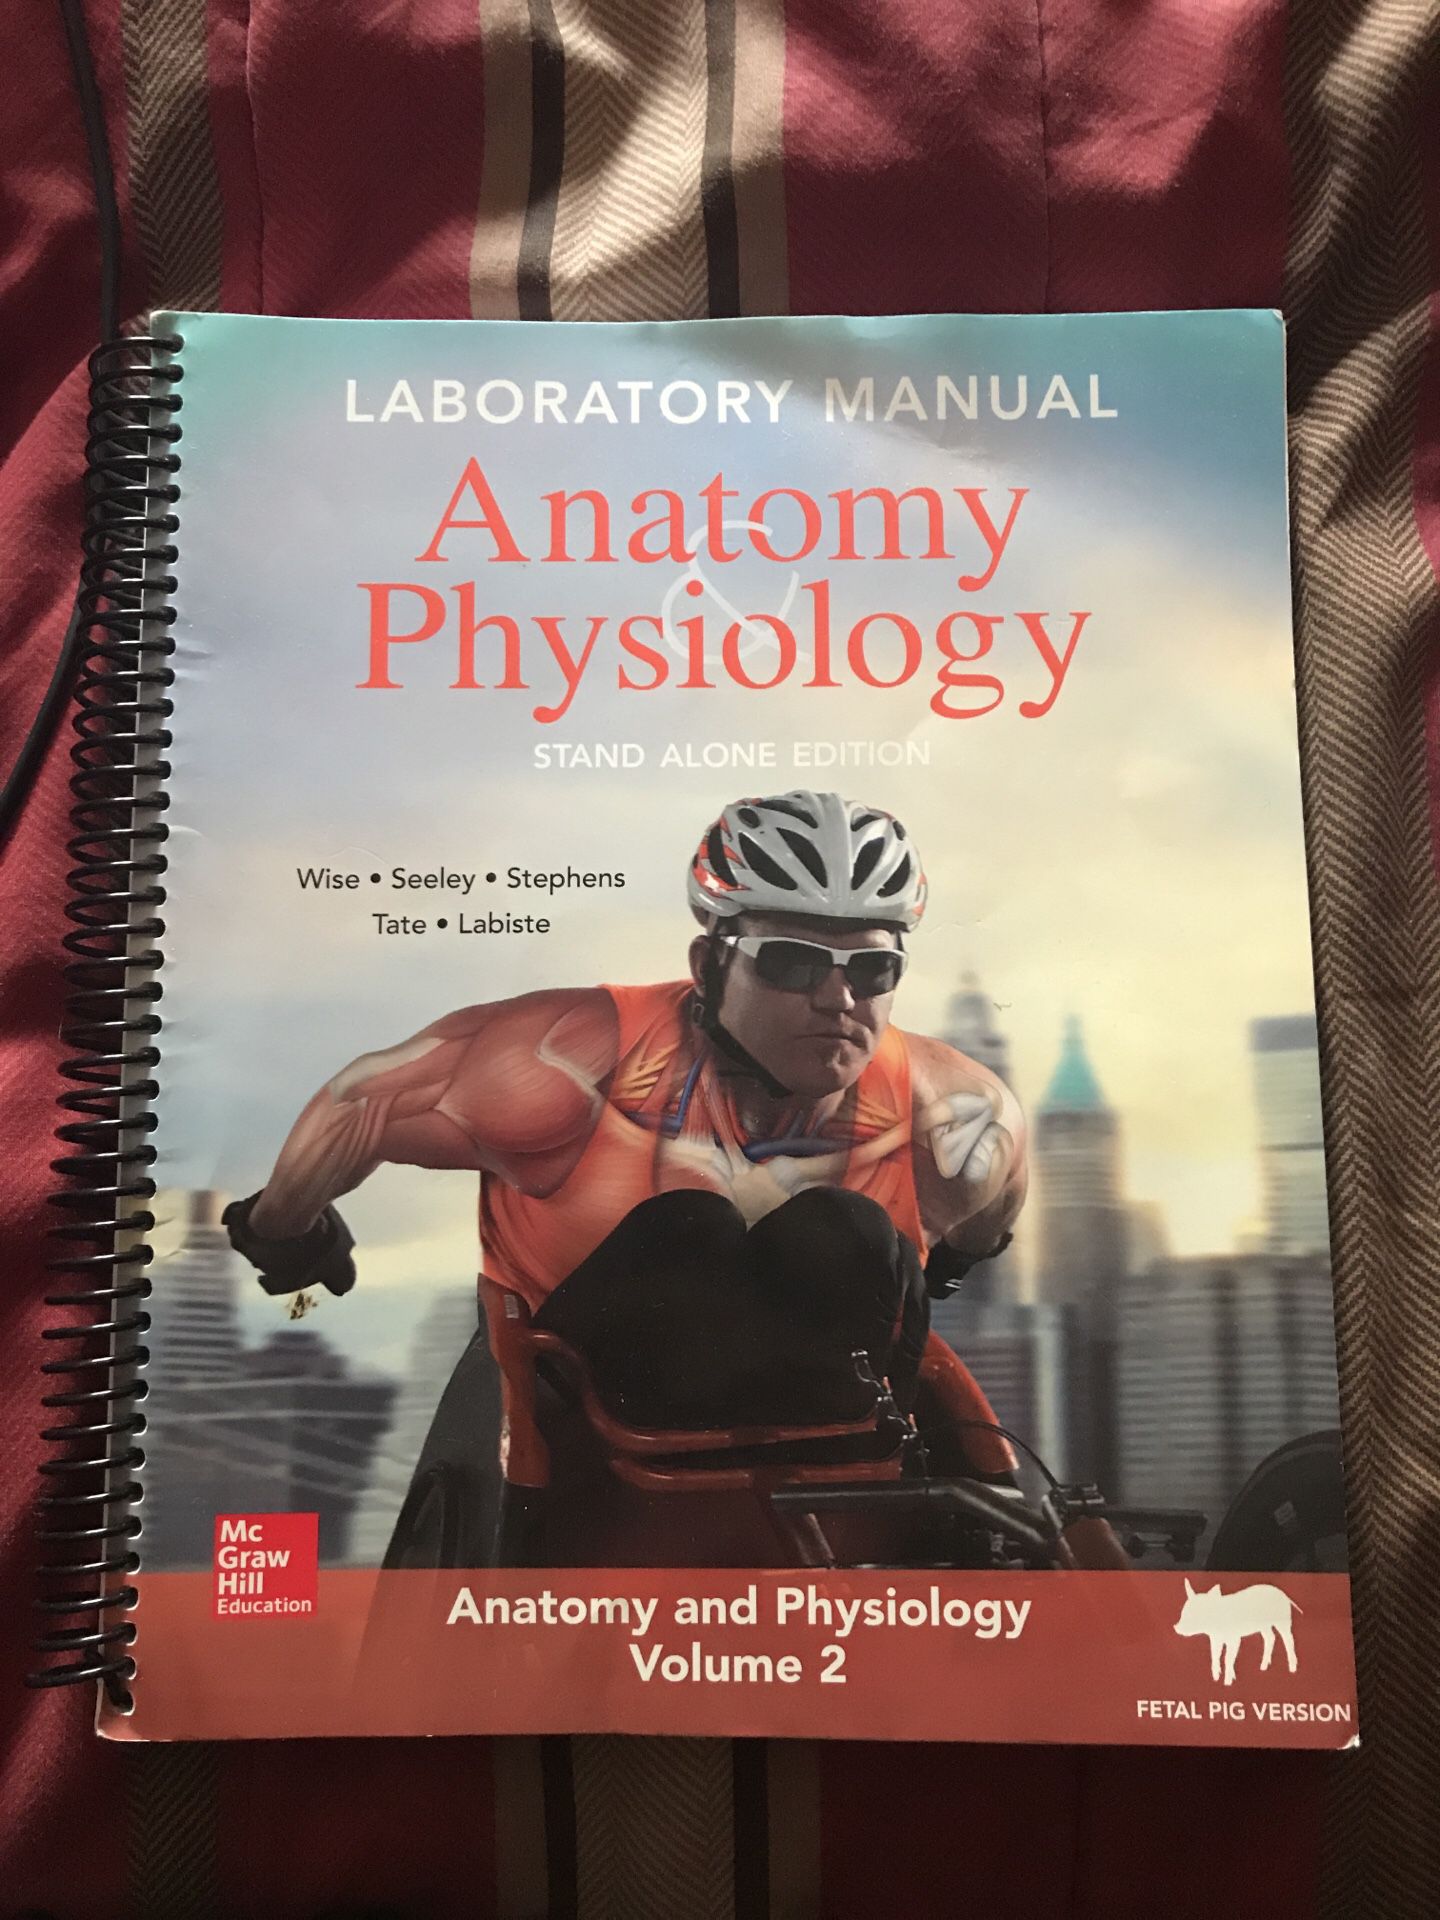 Anatomy and physiology Volume 2 edition Laboratory Manual.